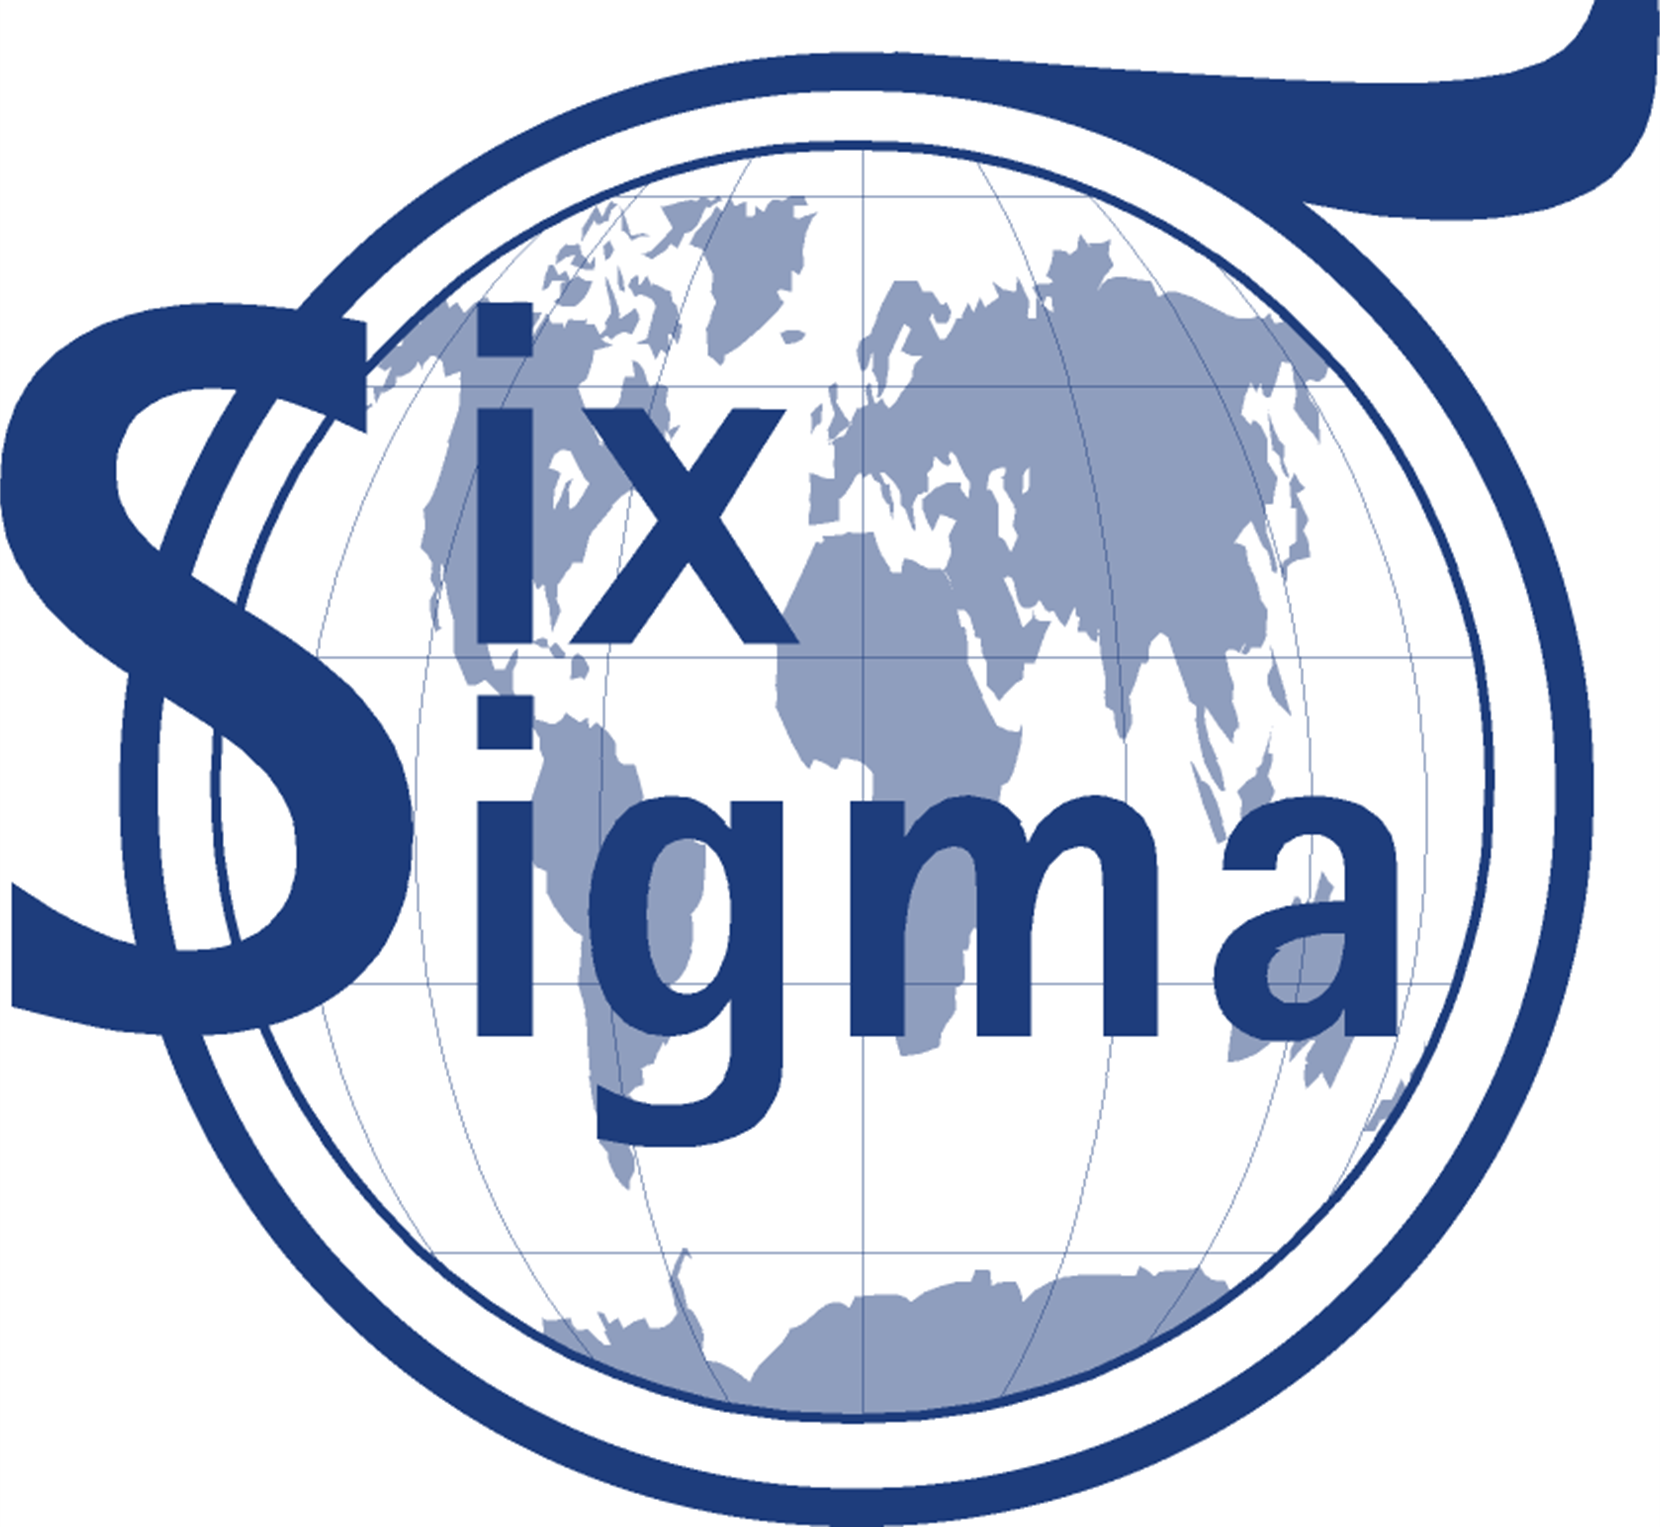 Can Six Sigma Be Used in Software Development?